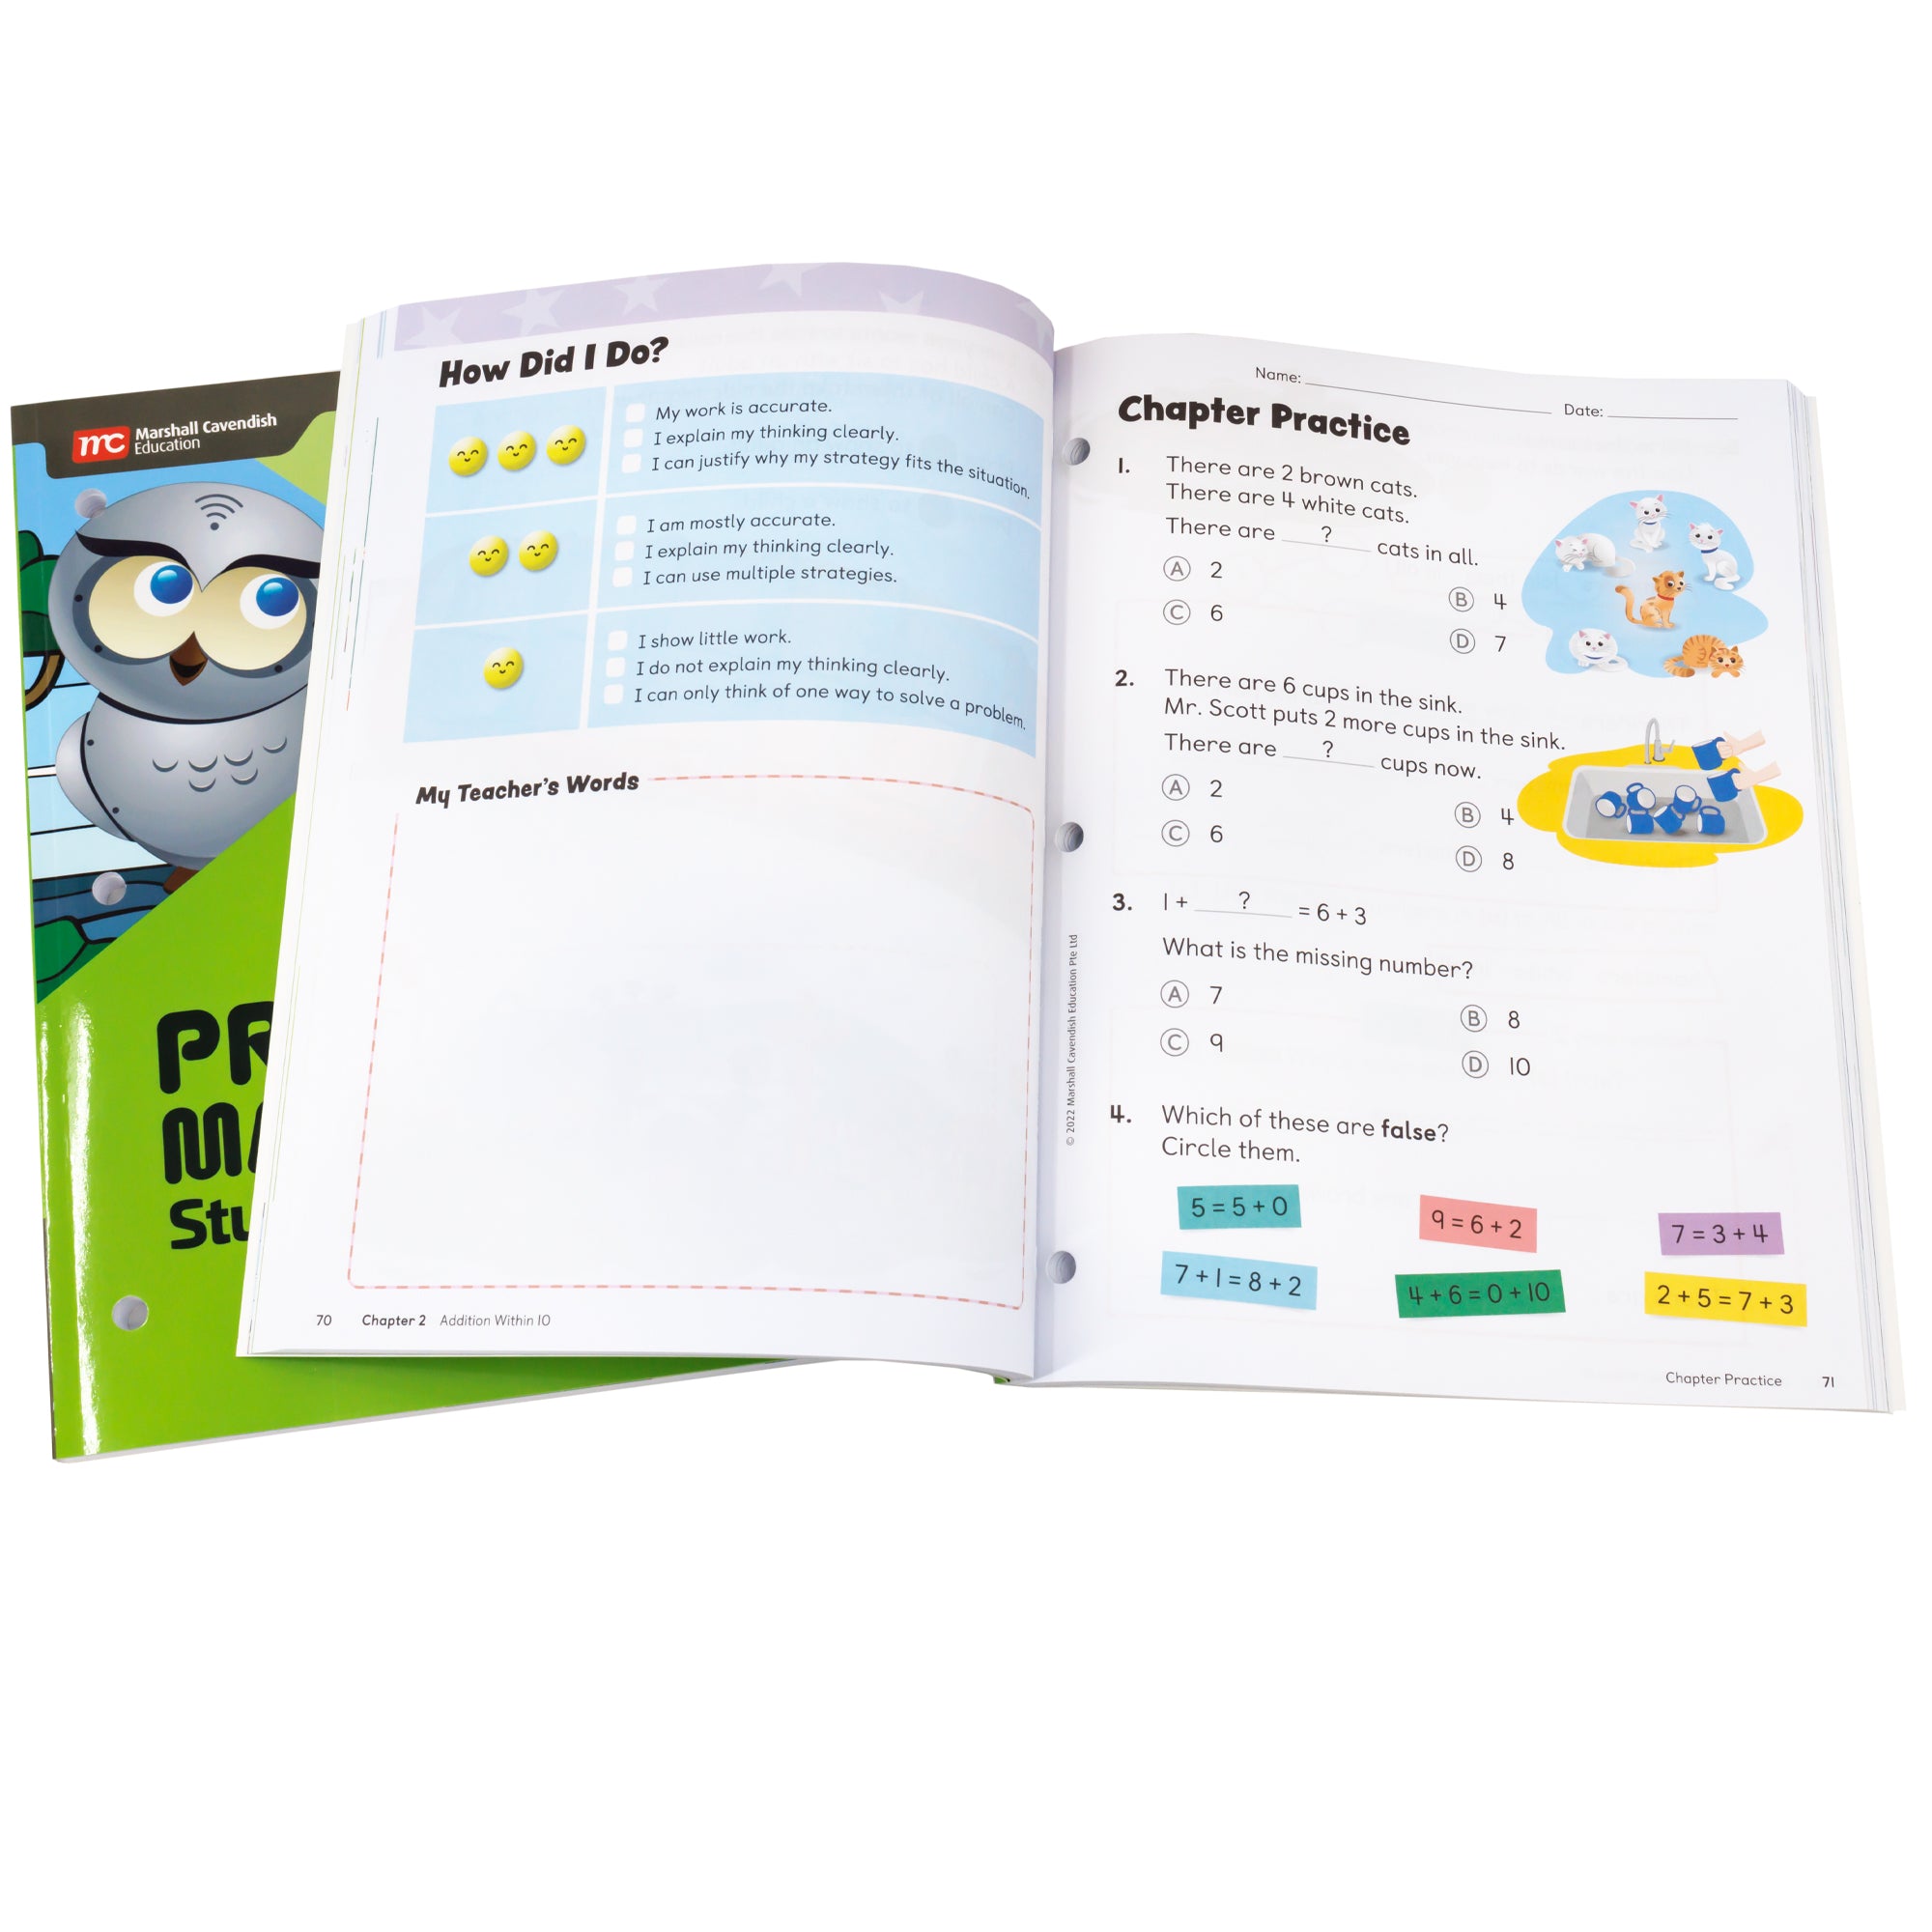 Singapore Primary Math first grade books. On top is an open book showing math problems with cartoon animals. Under the open book and to the left is a closed book with an owl and green background.